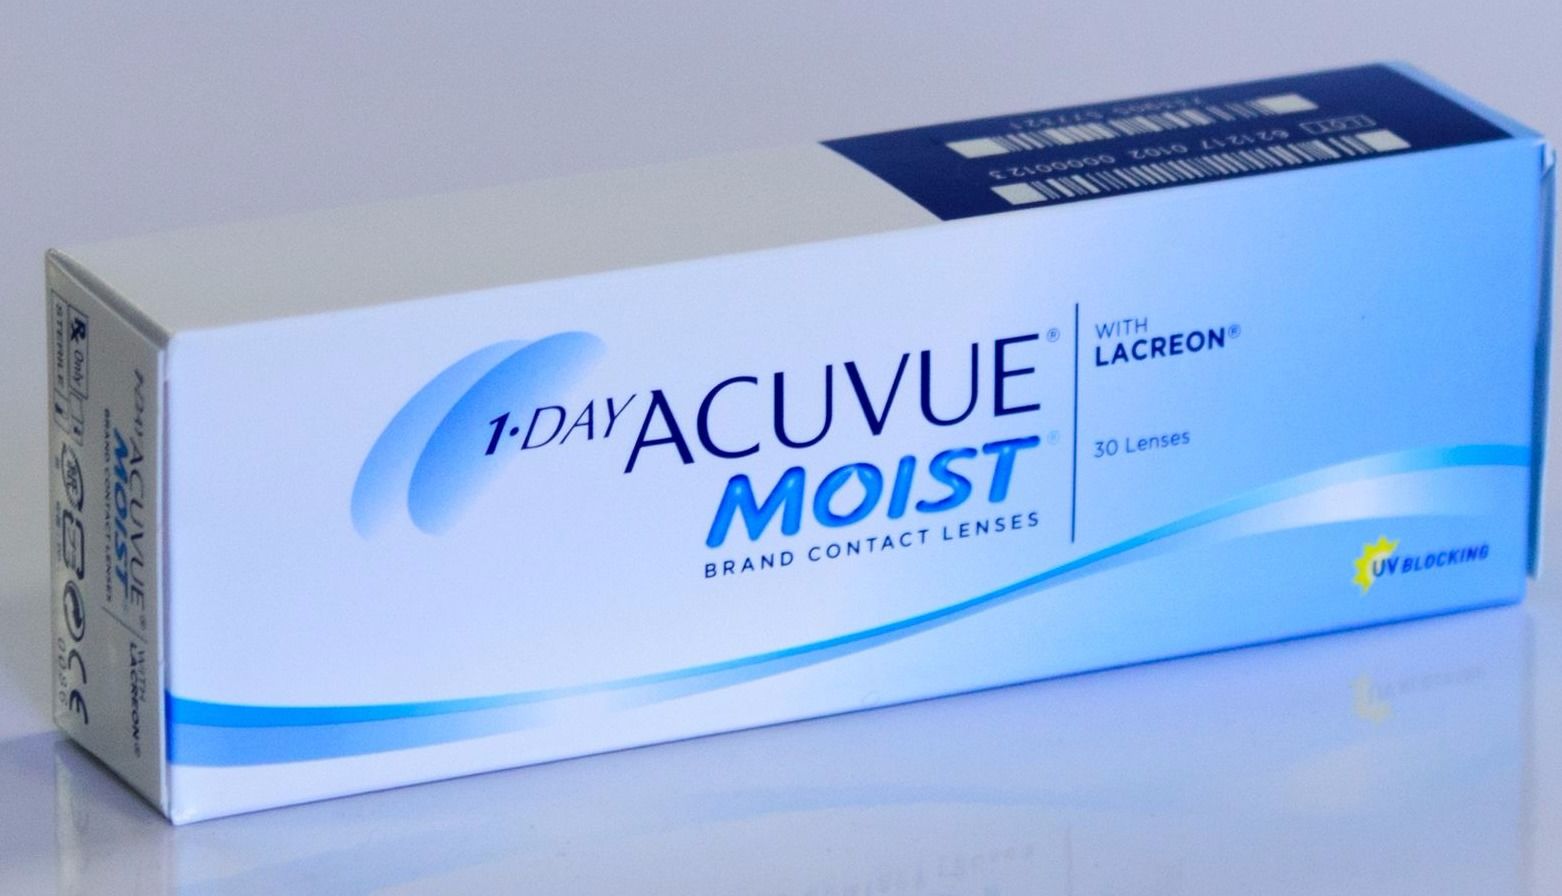 1-day-acuvue-moist-for-astigmatism-90-total-contacts